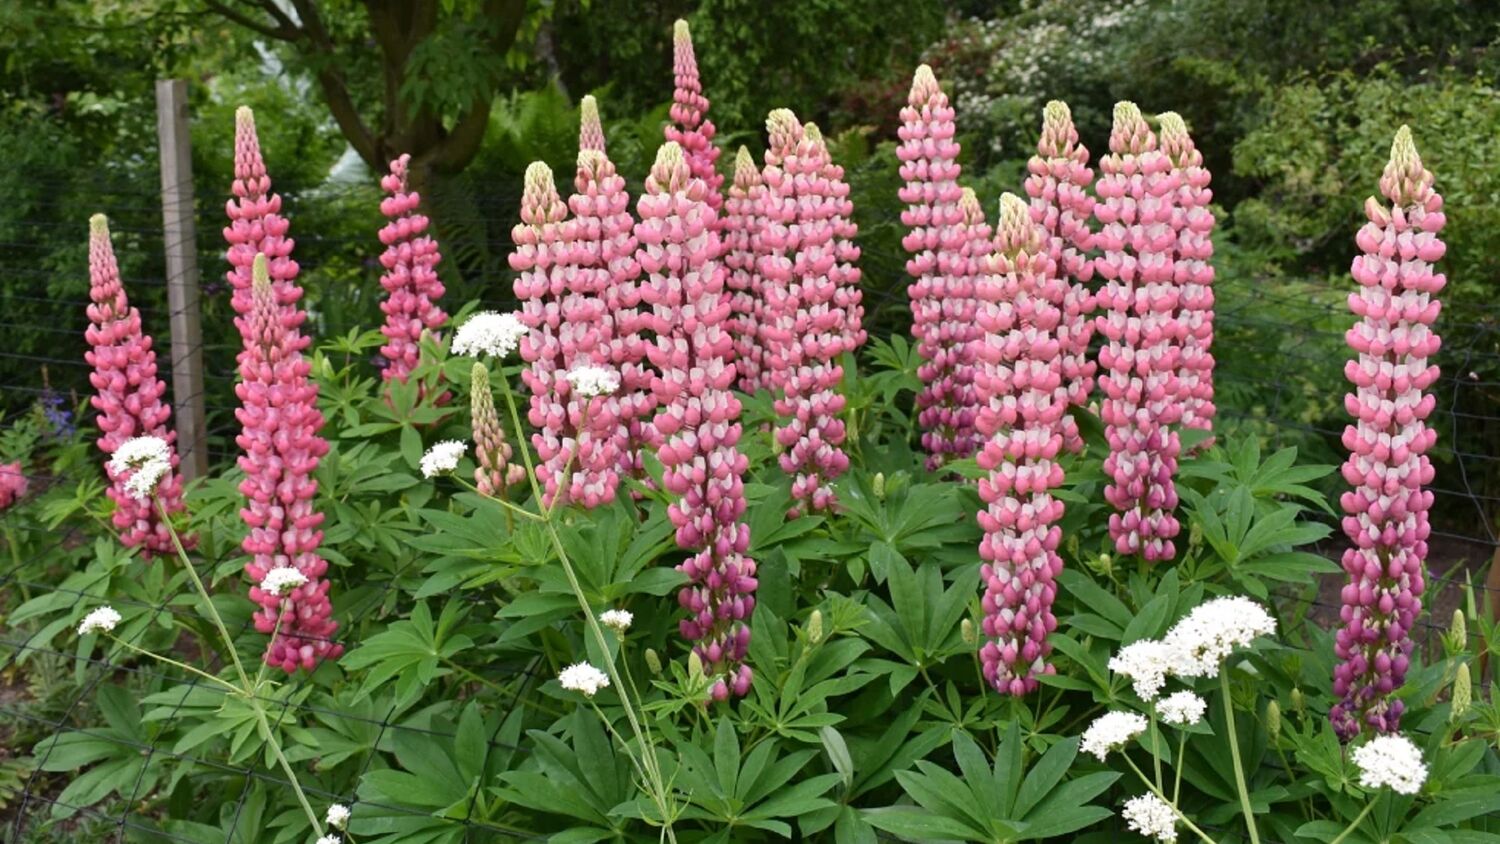 A group of pink lupins grow in a border. Clusters of pink-purple flowers grow all the way up their chunky stems.